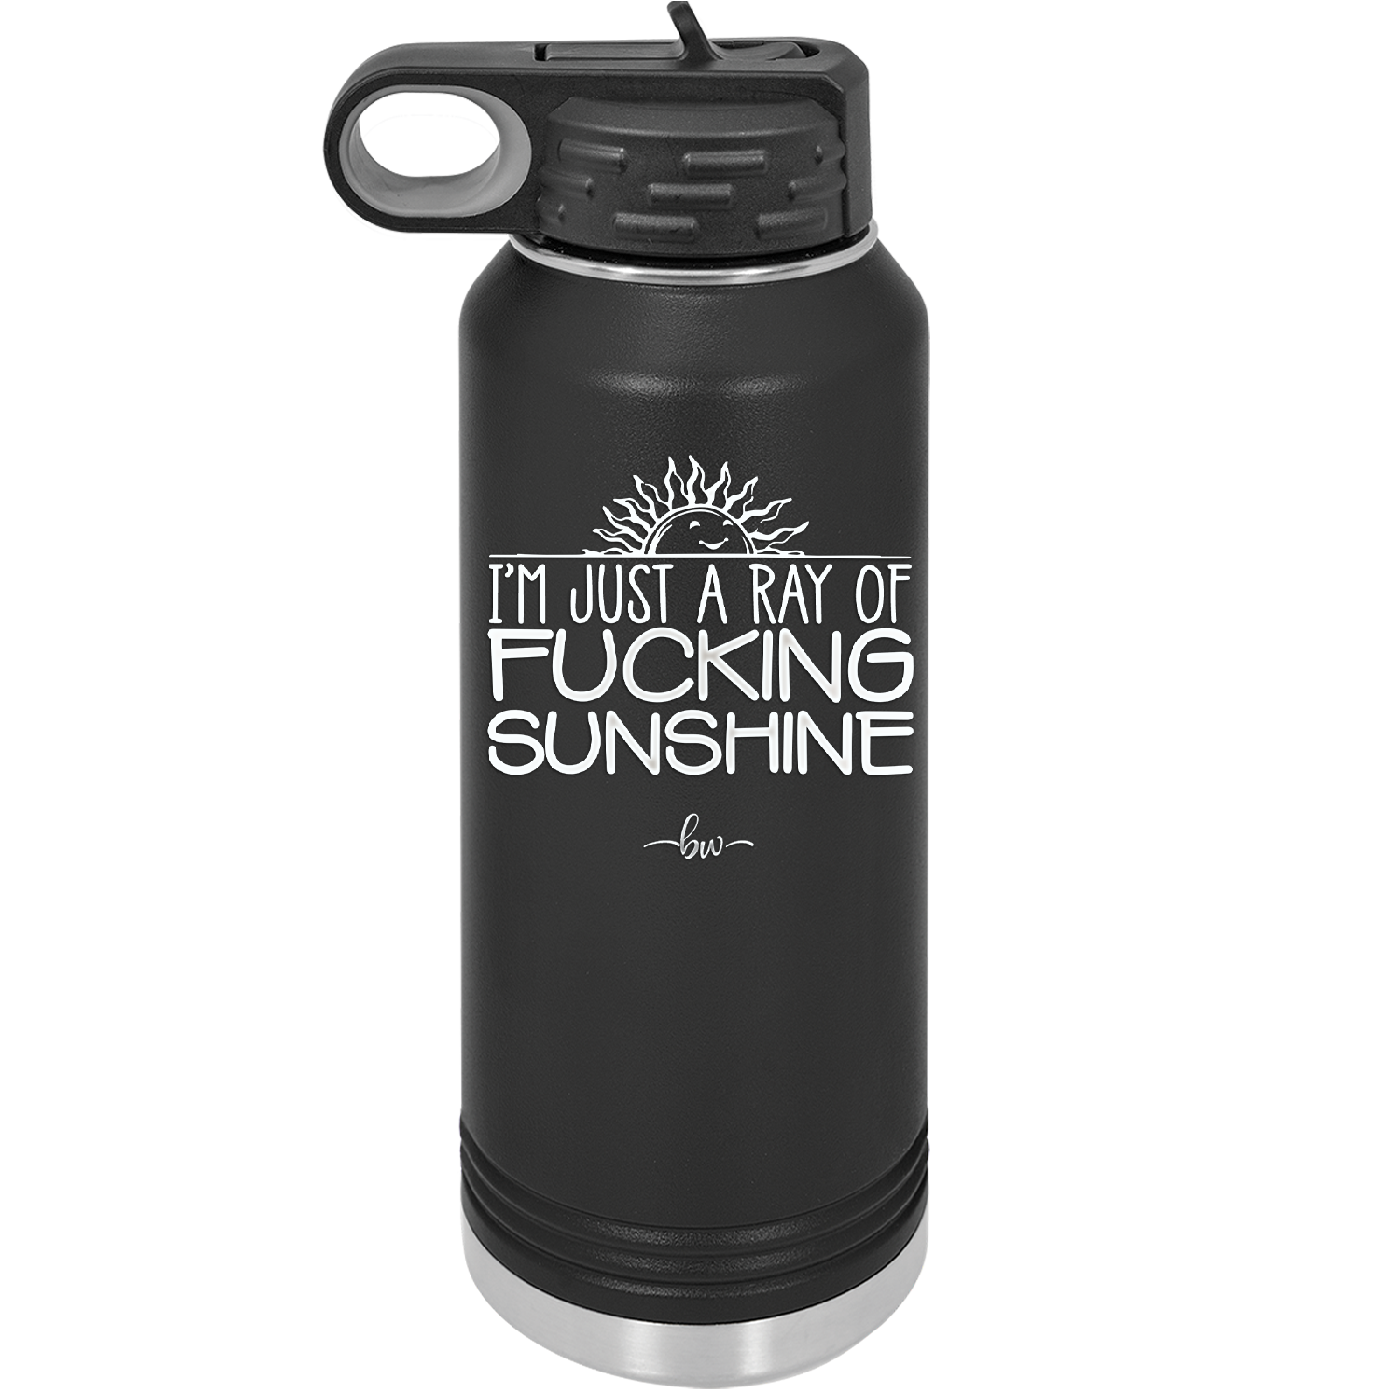 I'm Just a Ray of Fucking Sunshine - Laser Engraved Stainless Steel Drinkware - 2288 -